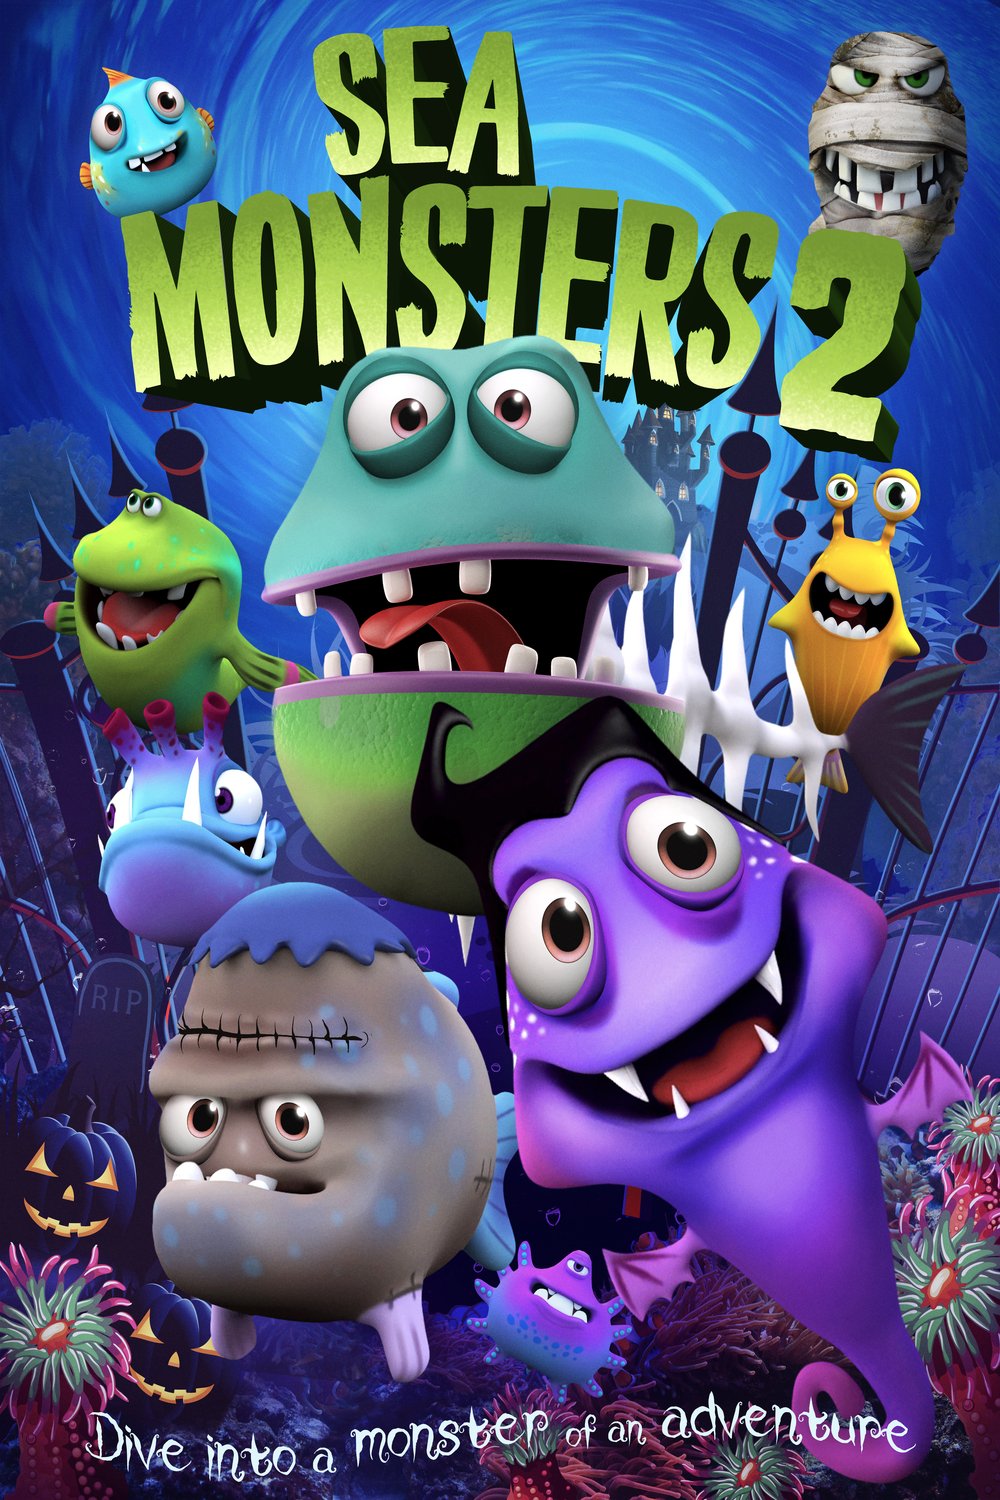 Poster of the movie Sea Monsters 2